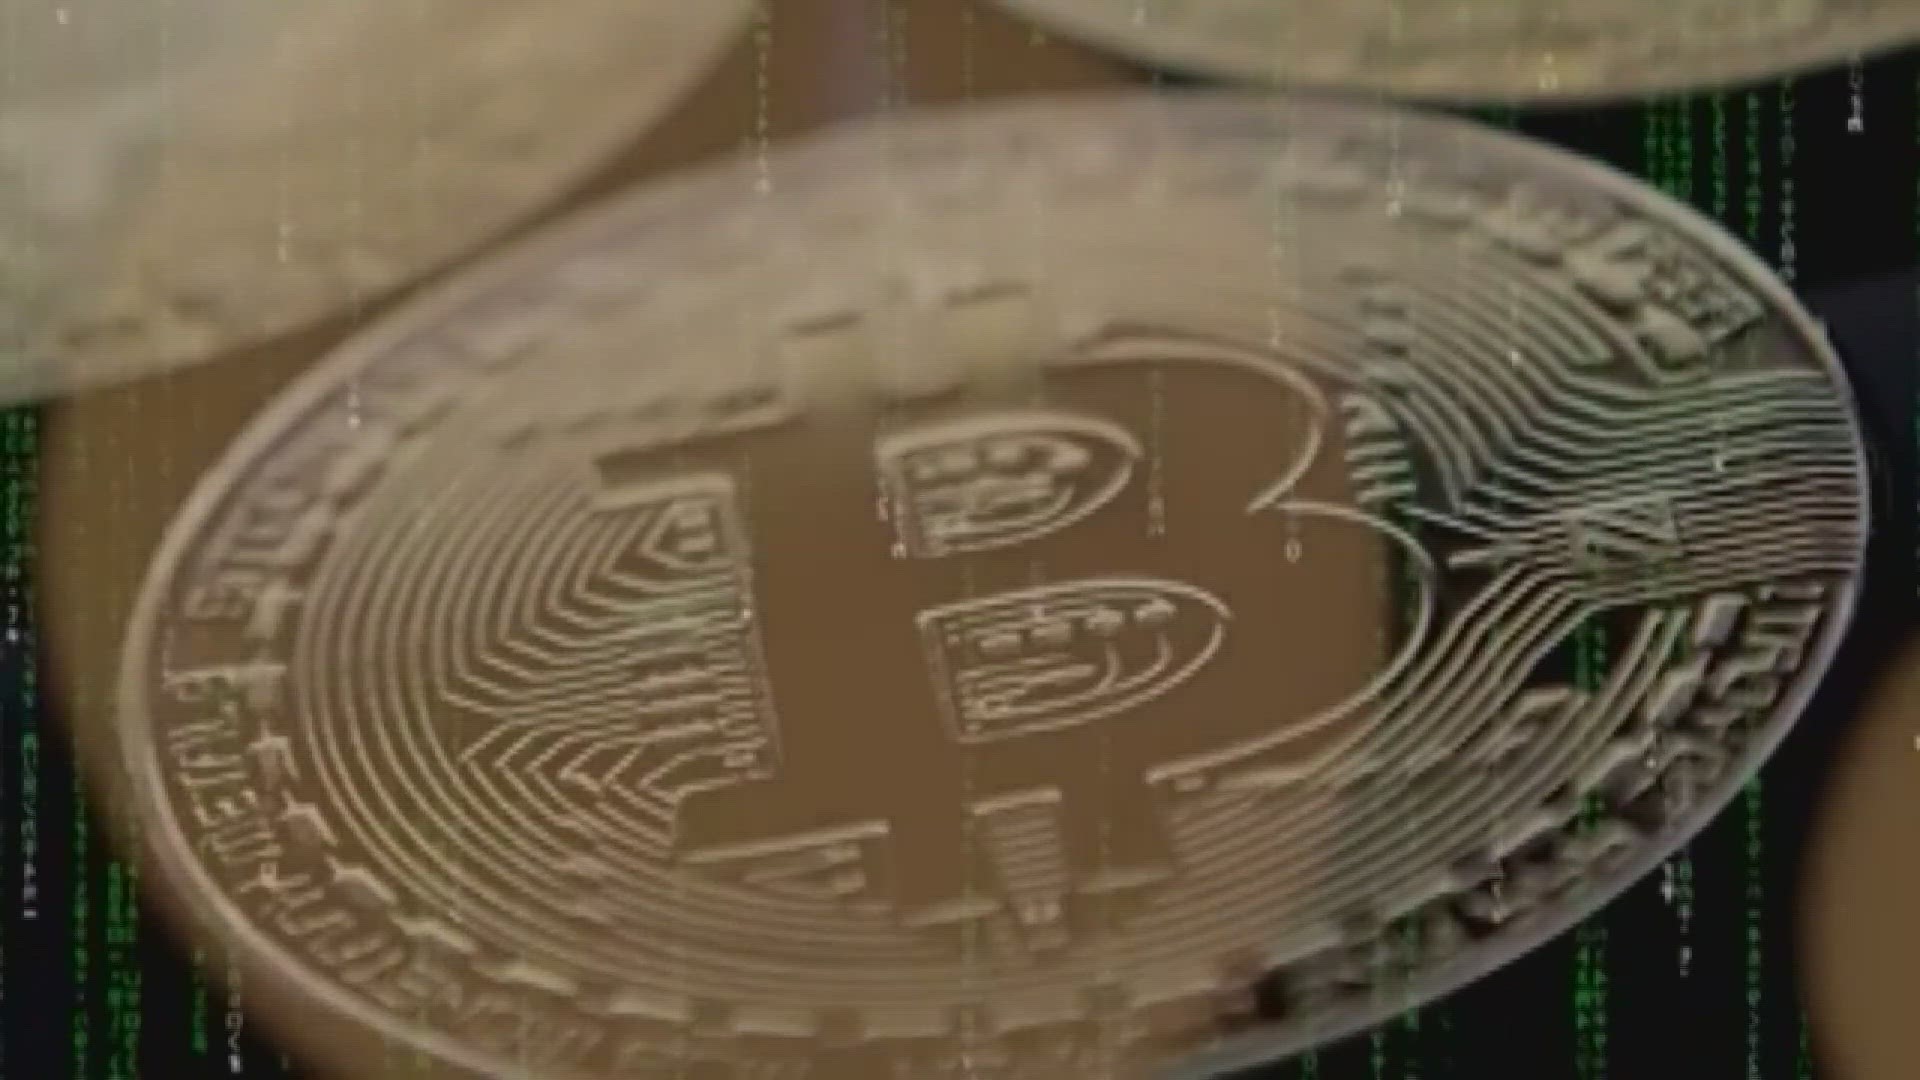 Scammers ask people to withdraw money from their bank accounts and transfer it to them through bitcoin ATMs.